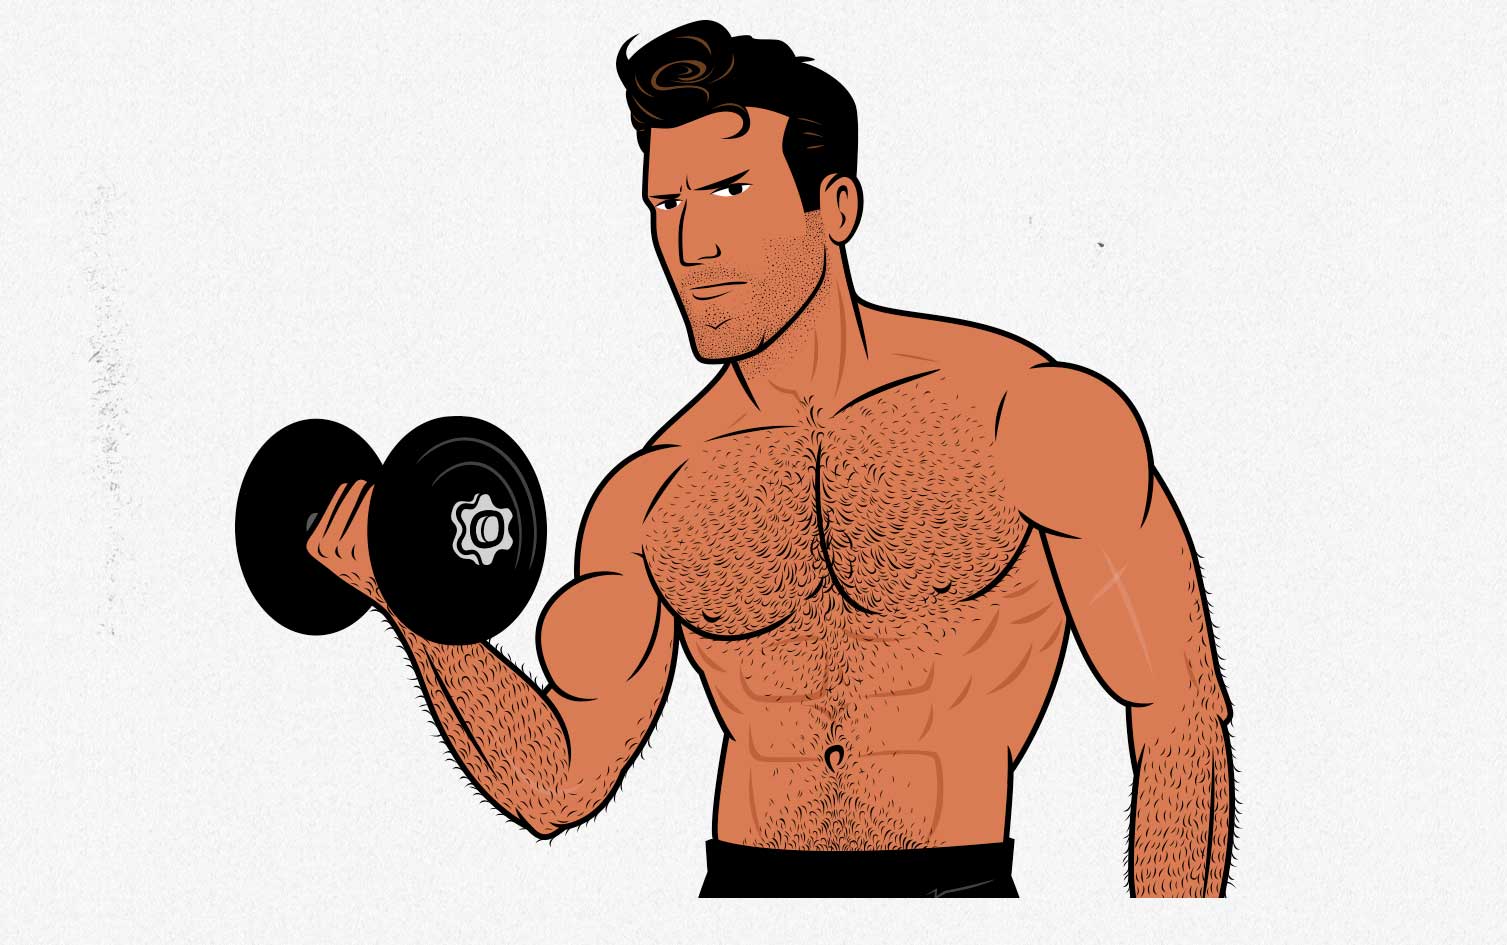 Cartoon of a bodybuilding doing biceps curls to build bigger arms.